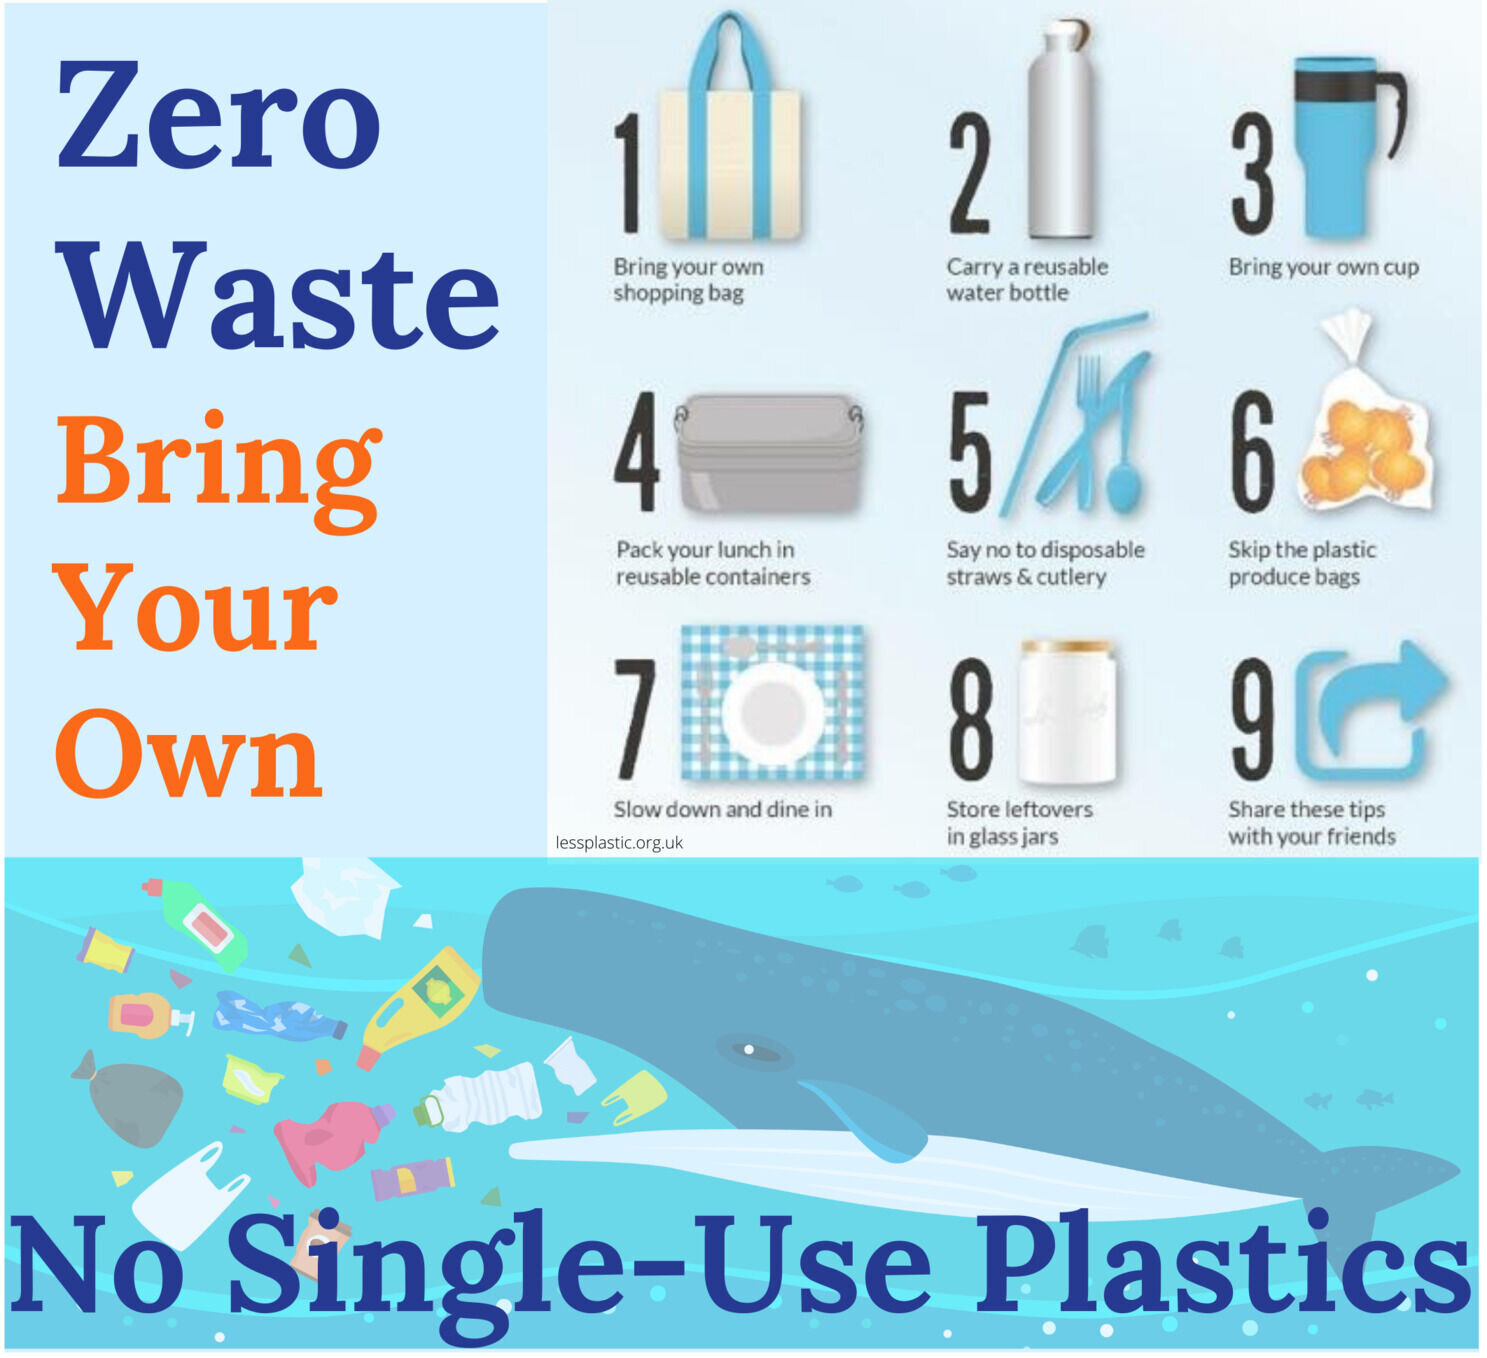 Bring a Reusable Water Bottle - Day 3 of the Zero Waste Challenge